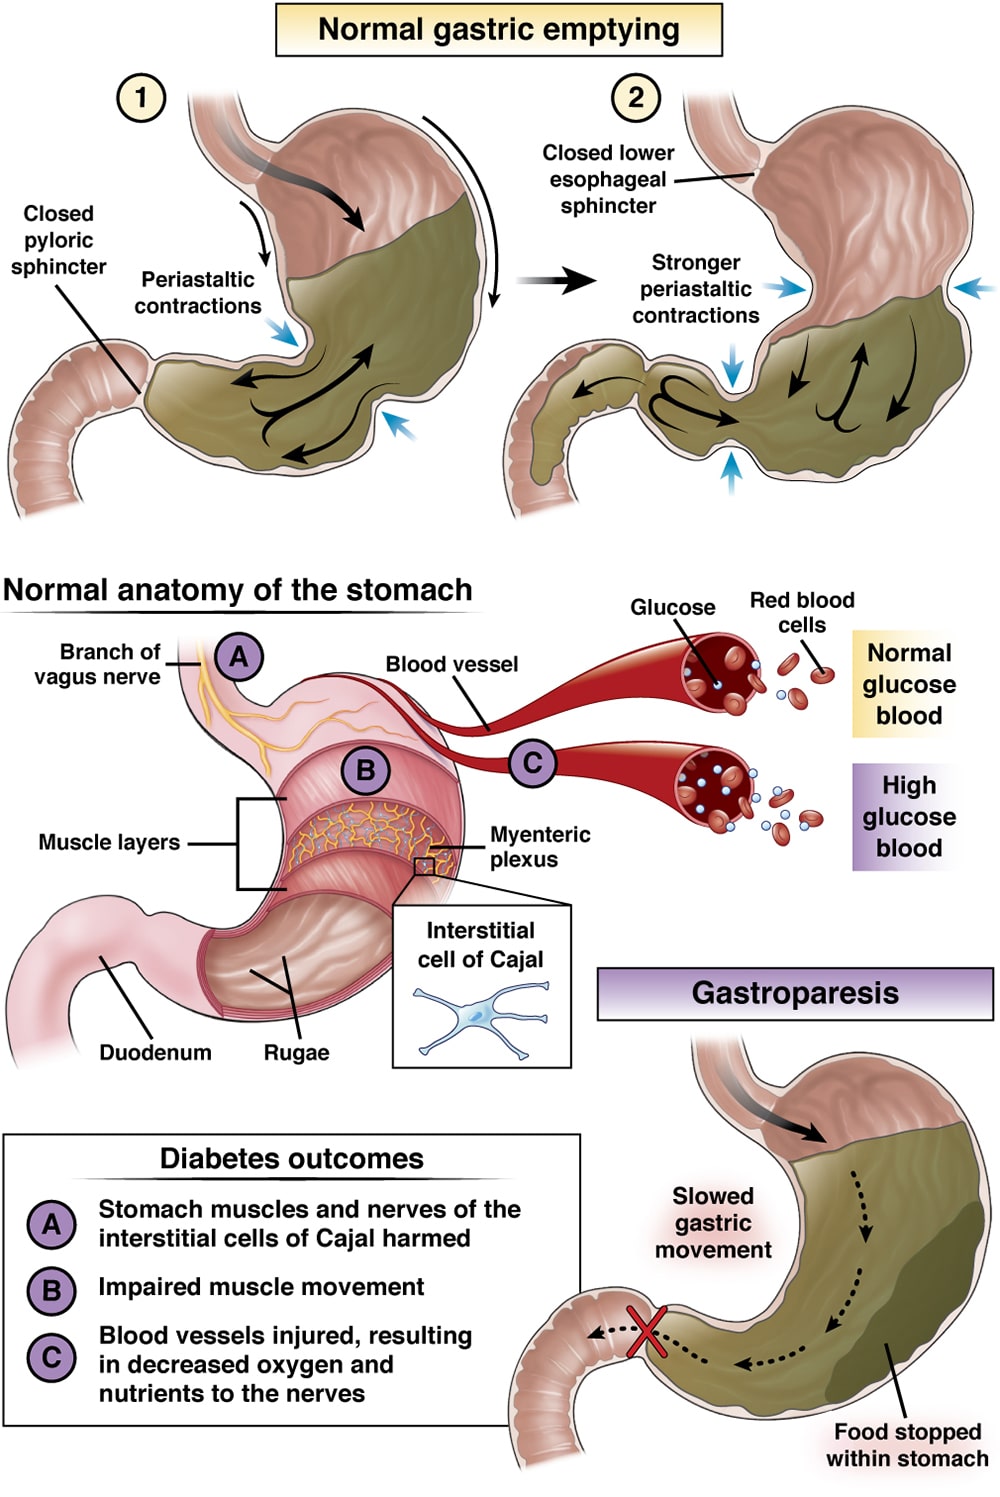 Hypoglycemia and gastrointestinal issues